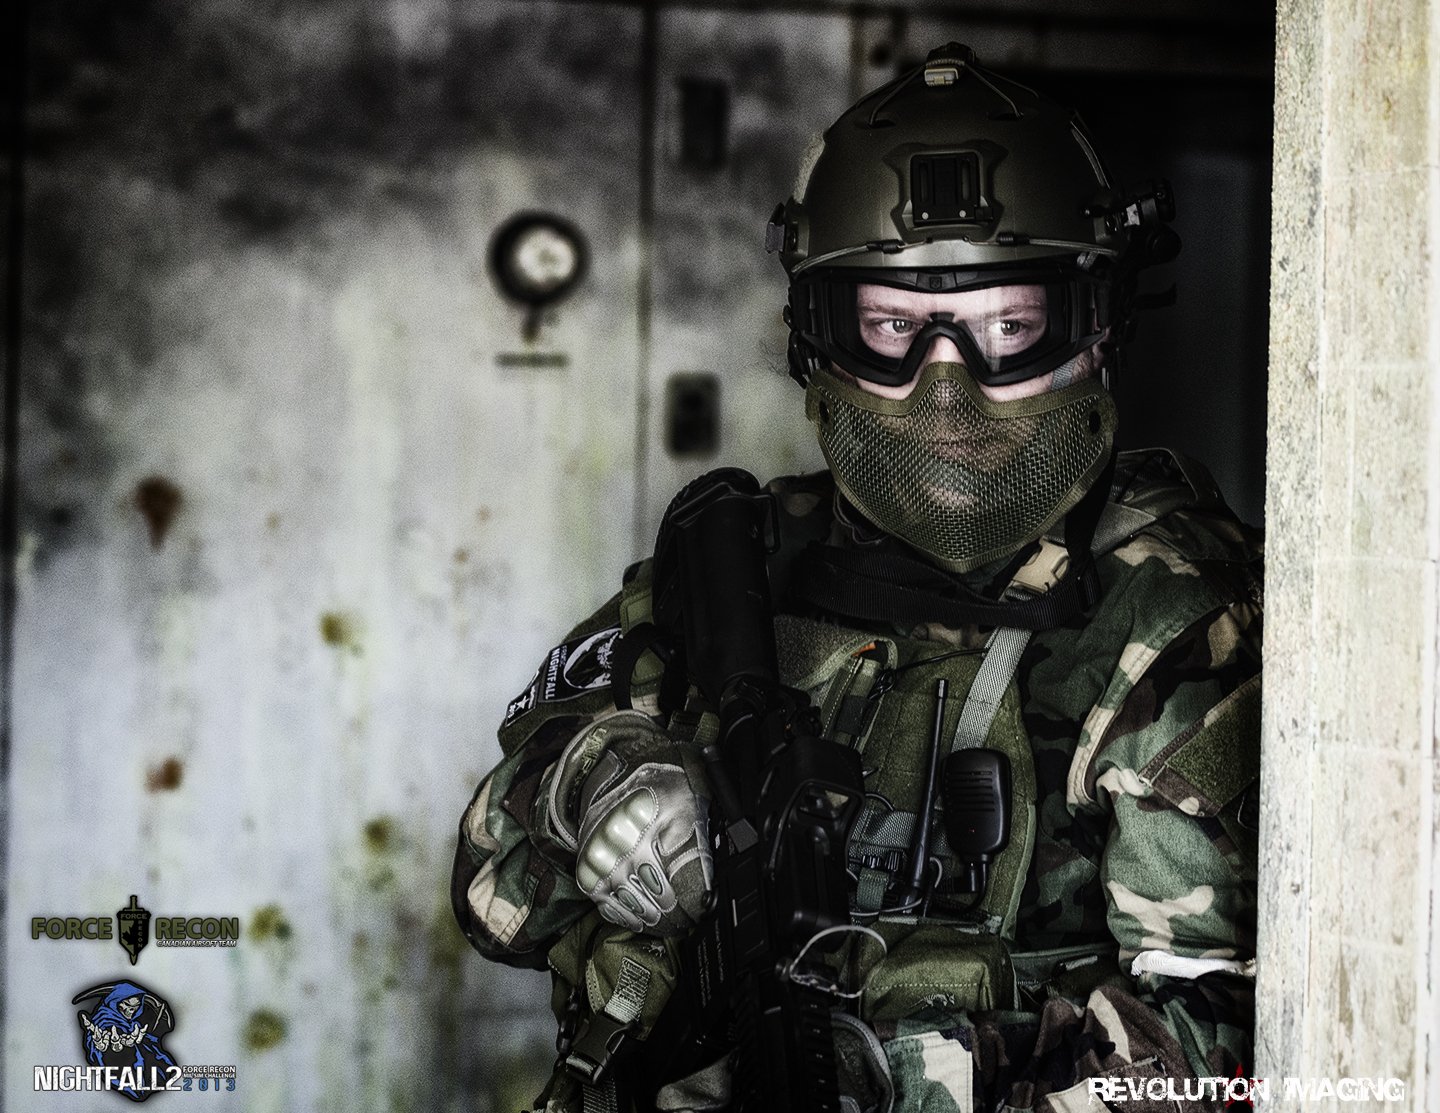 assault, Guns, Military, Rifle, Weapons, Airsoft, Game, Toys, Combat, Team Wallpaper